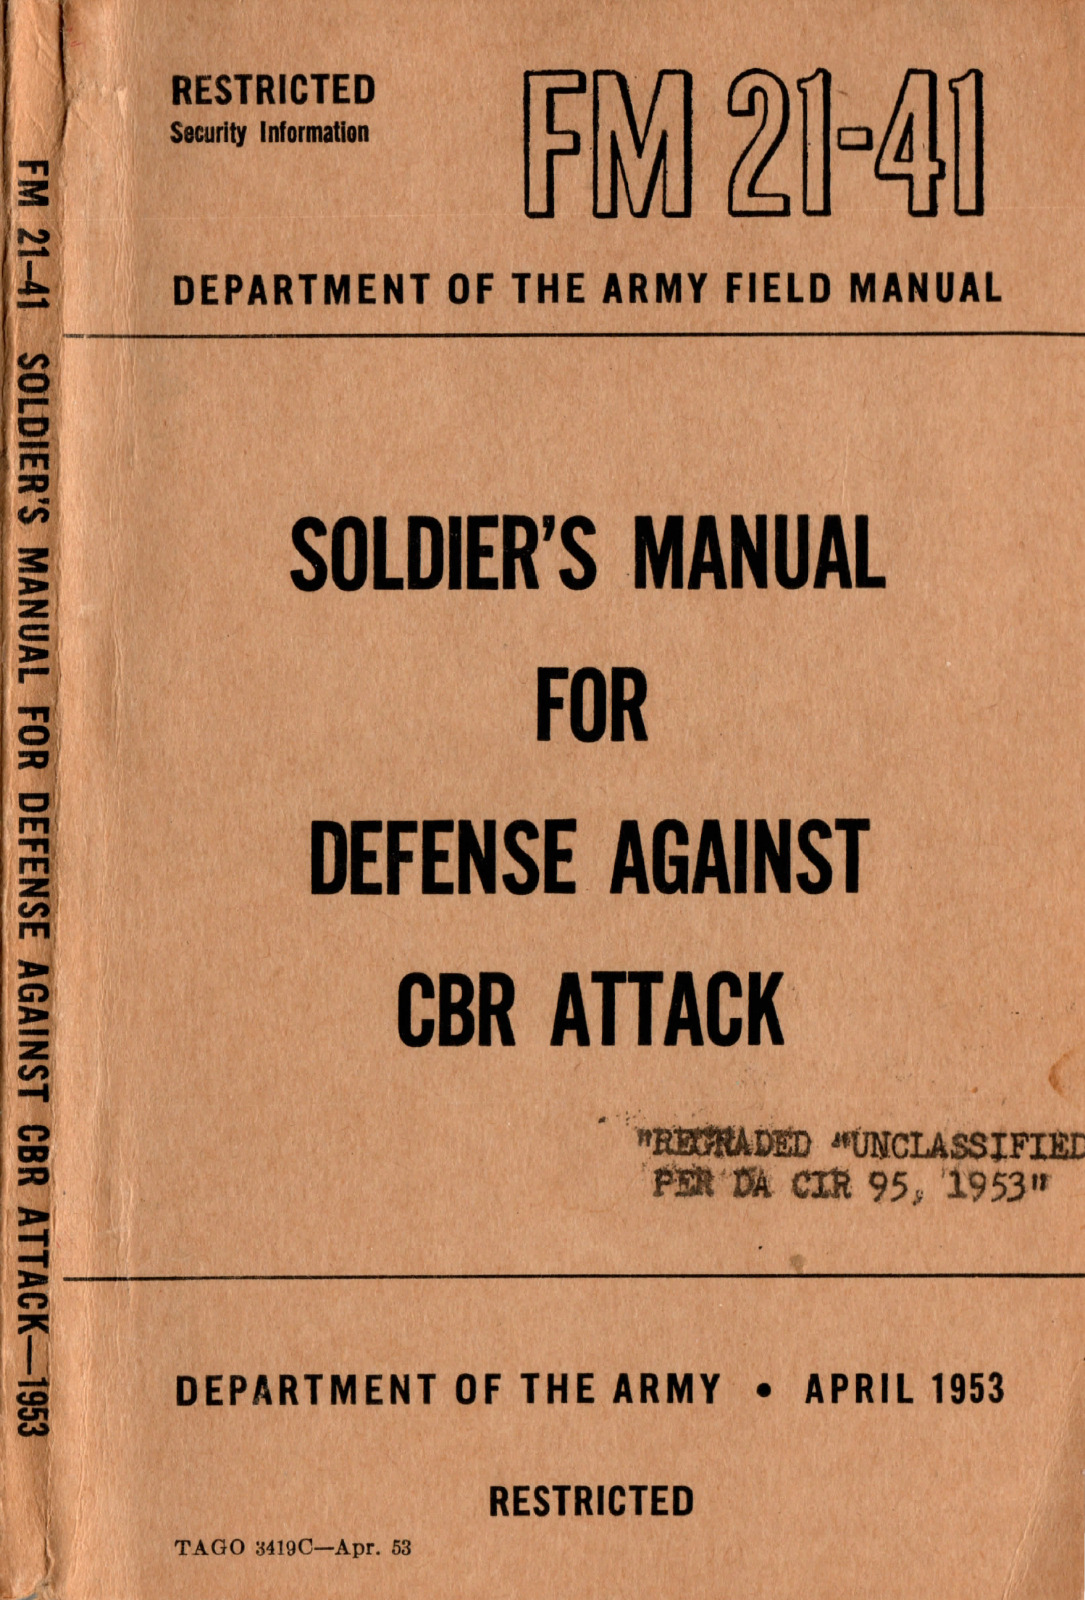 182 Page 1955 FM 21-41 SOLDIERS MANUAL FOR DEFENSE AGAINST CBR ATTACK on Data CD